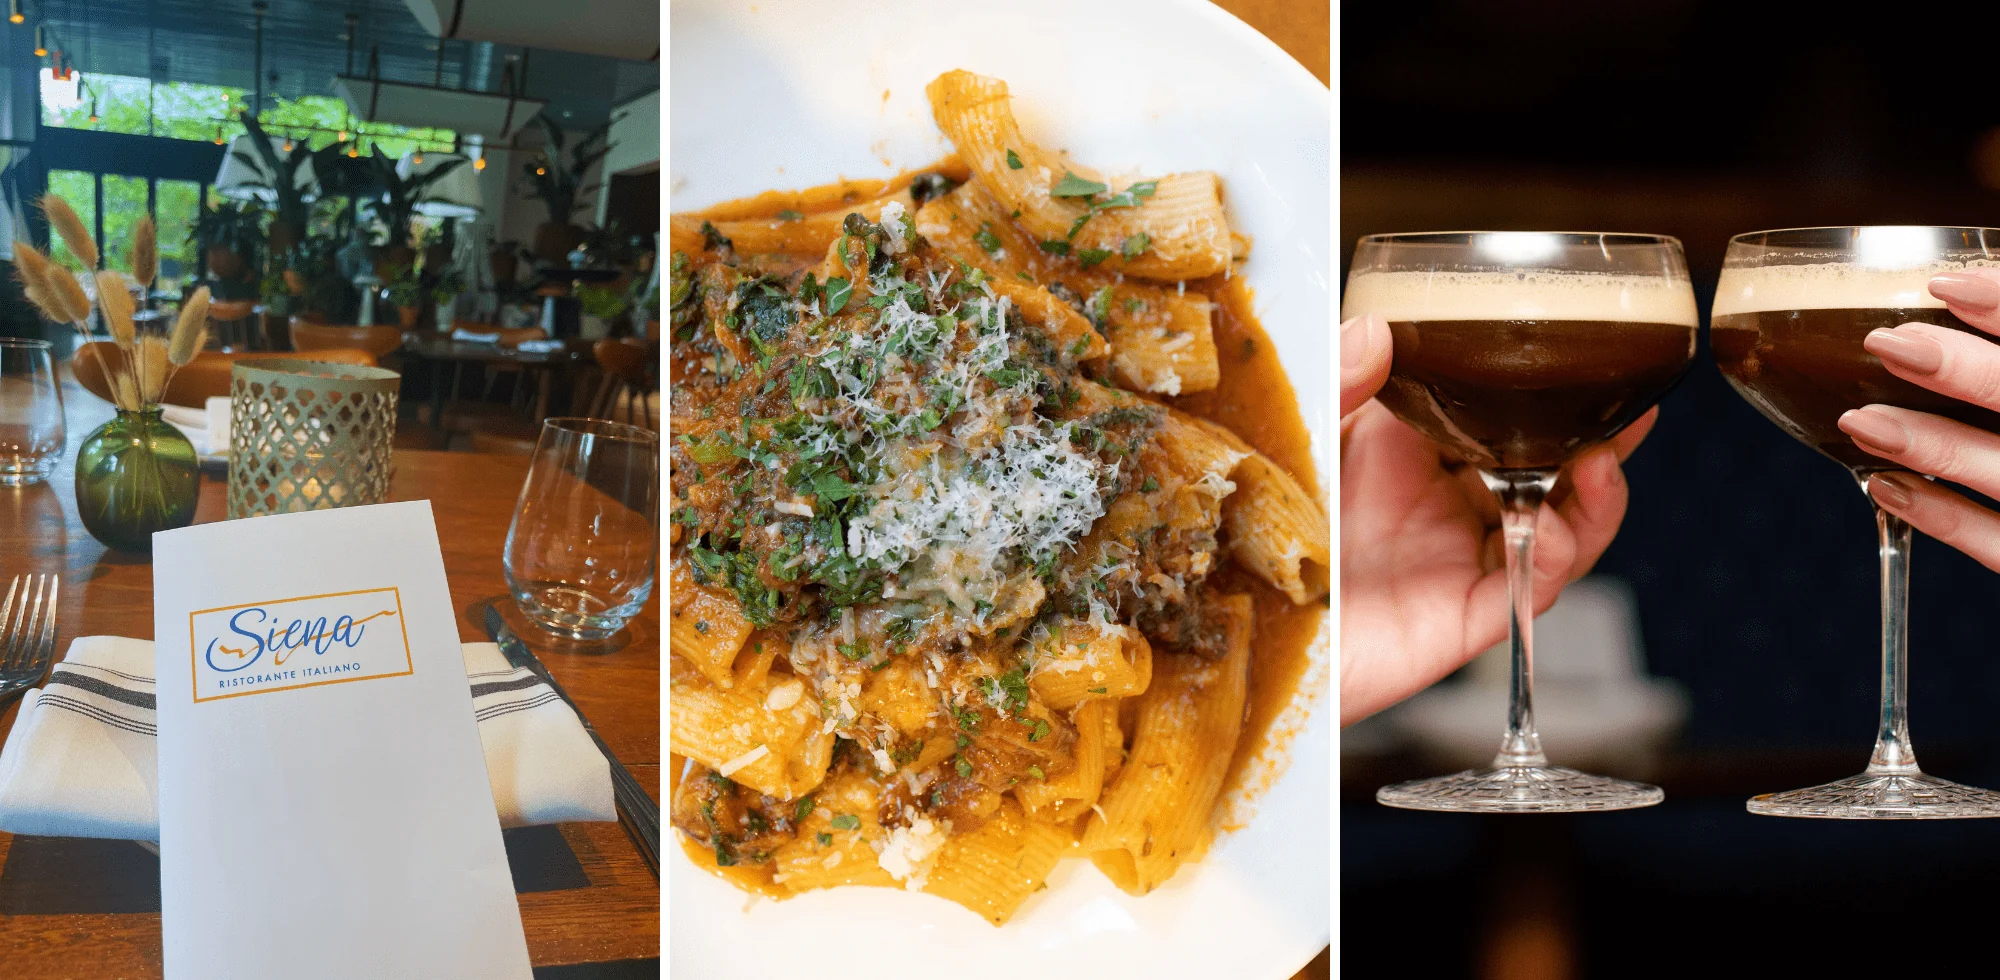 three images of a Siena menu, Baked pasta, glasses clinking together